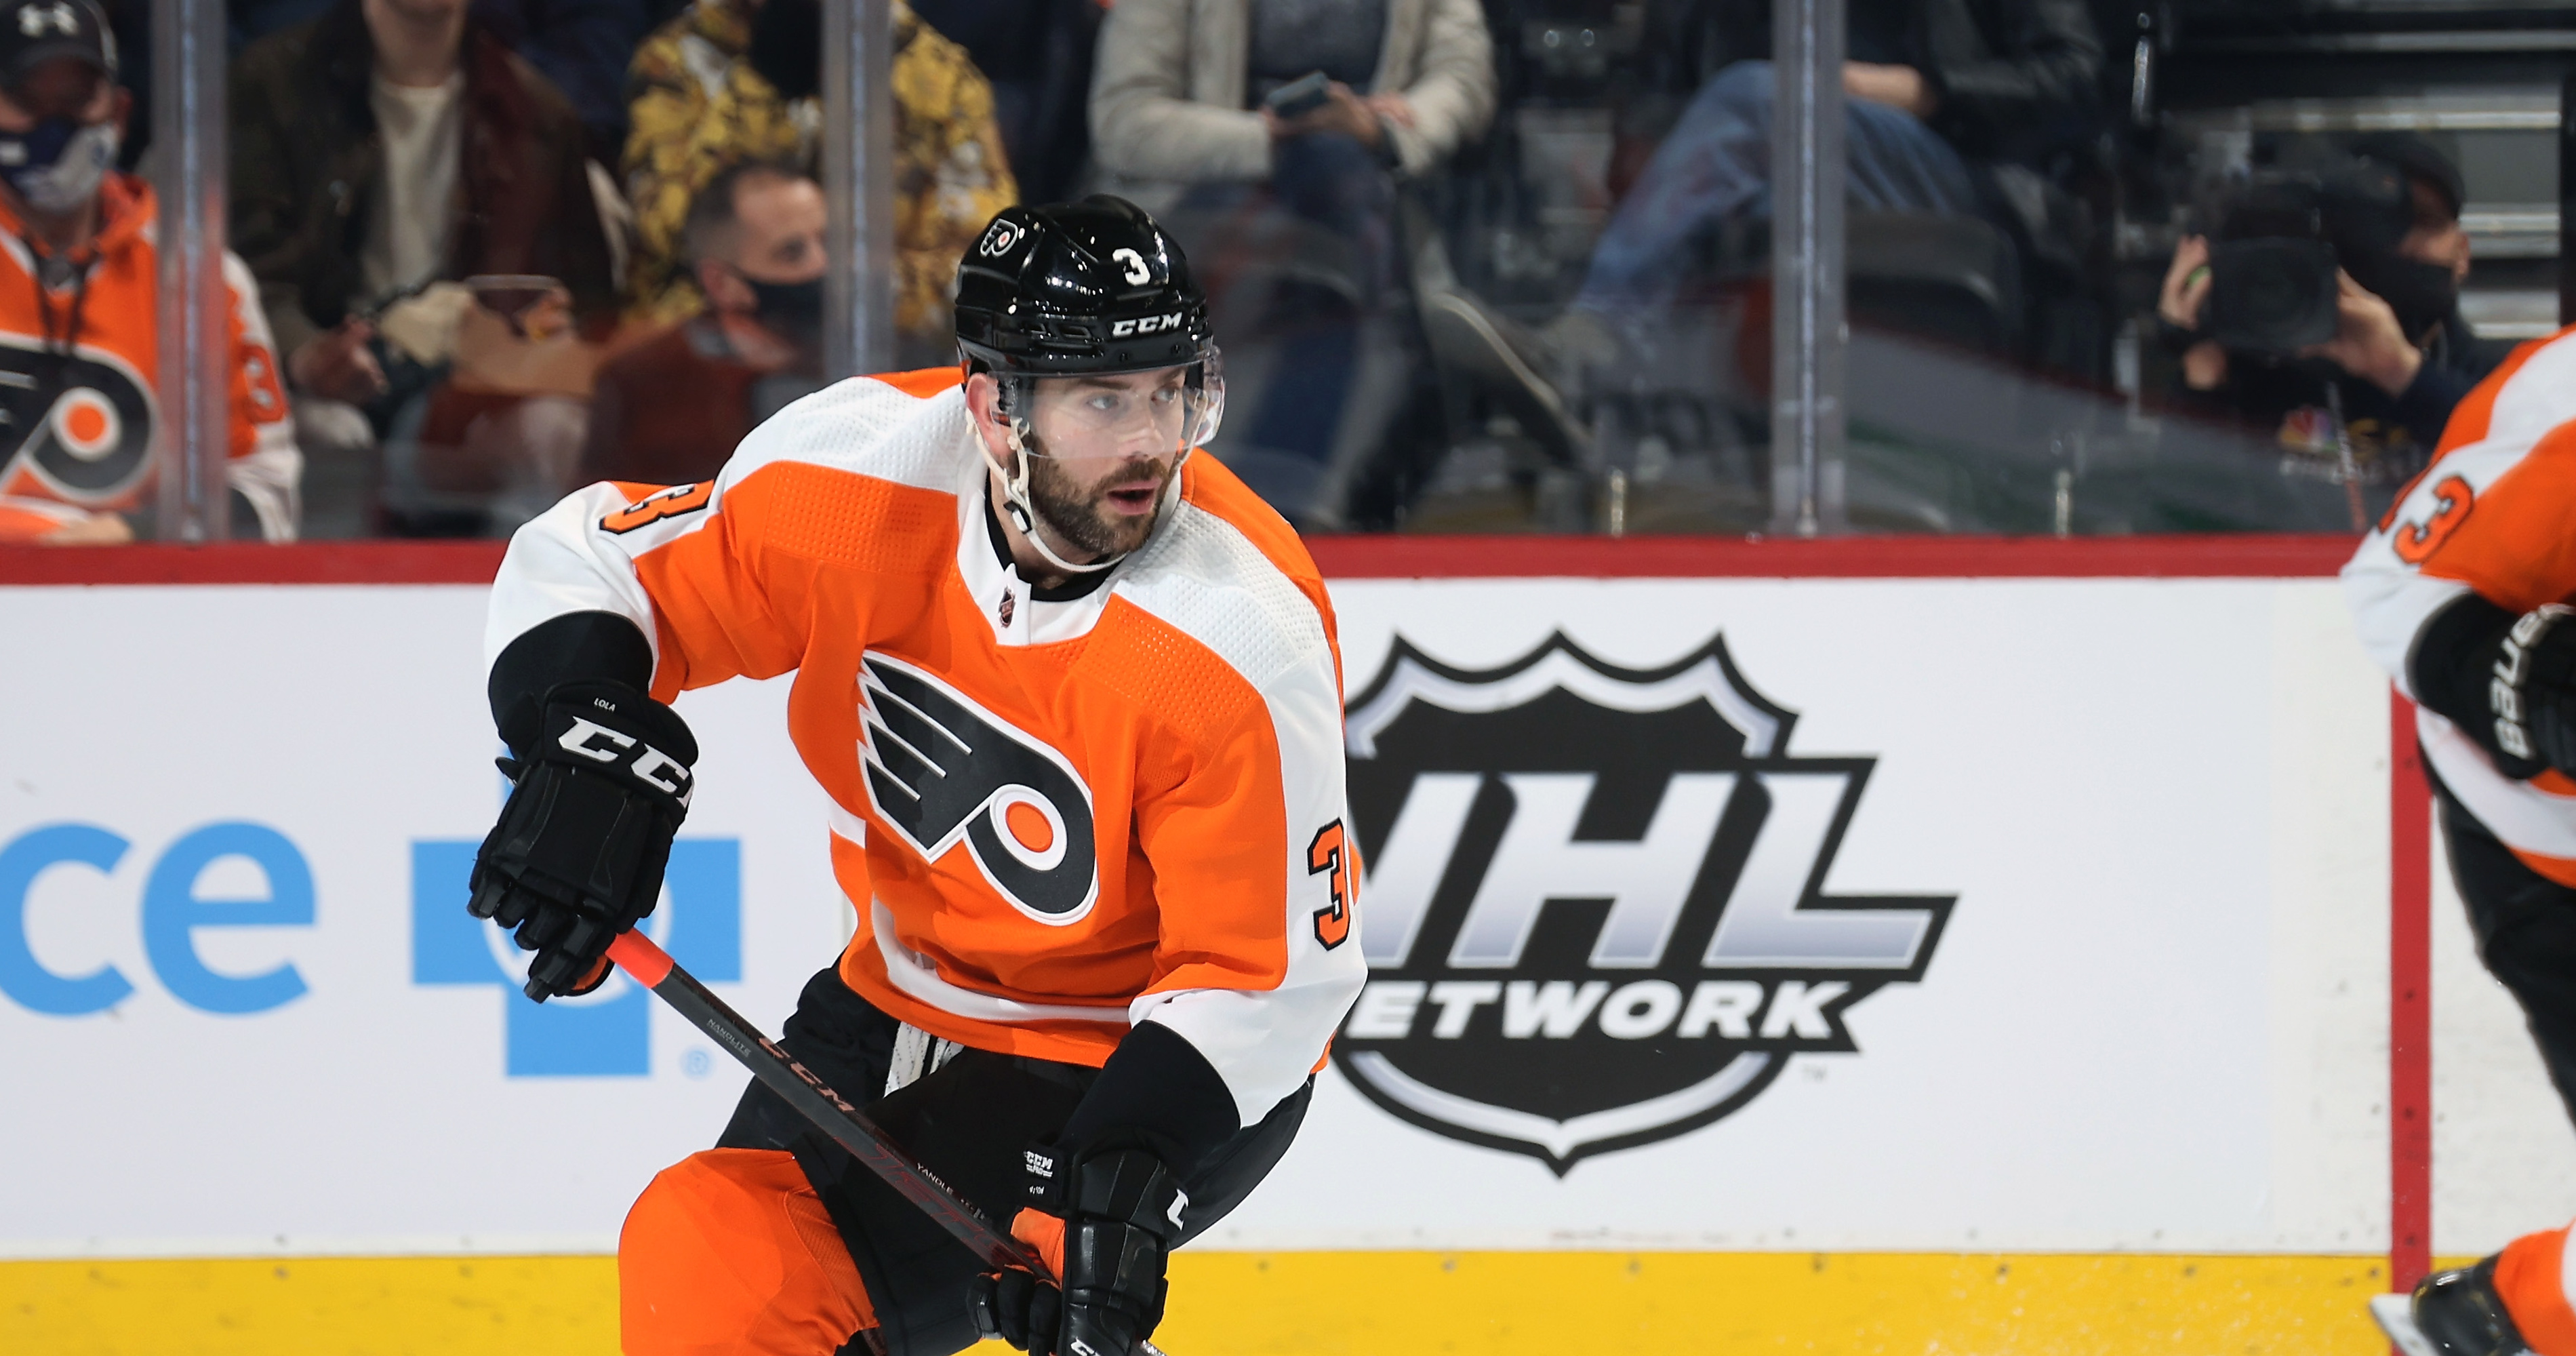 Flyers' Keith Yandle Ties Doug Jarvis' NHL Record For Most Consecutive